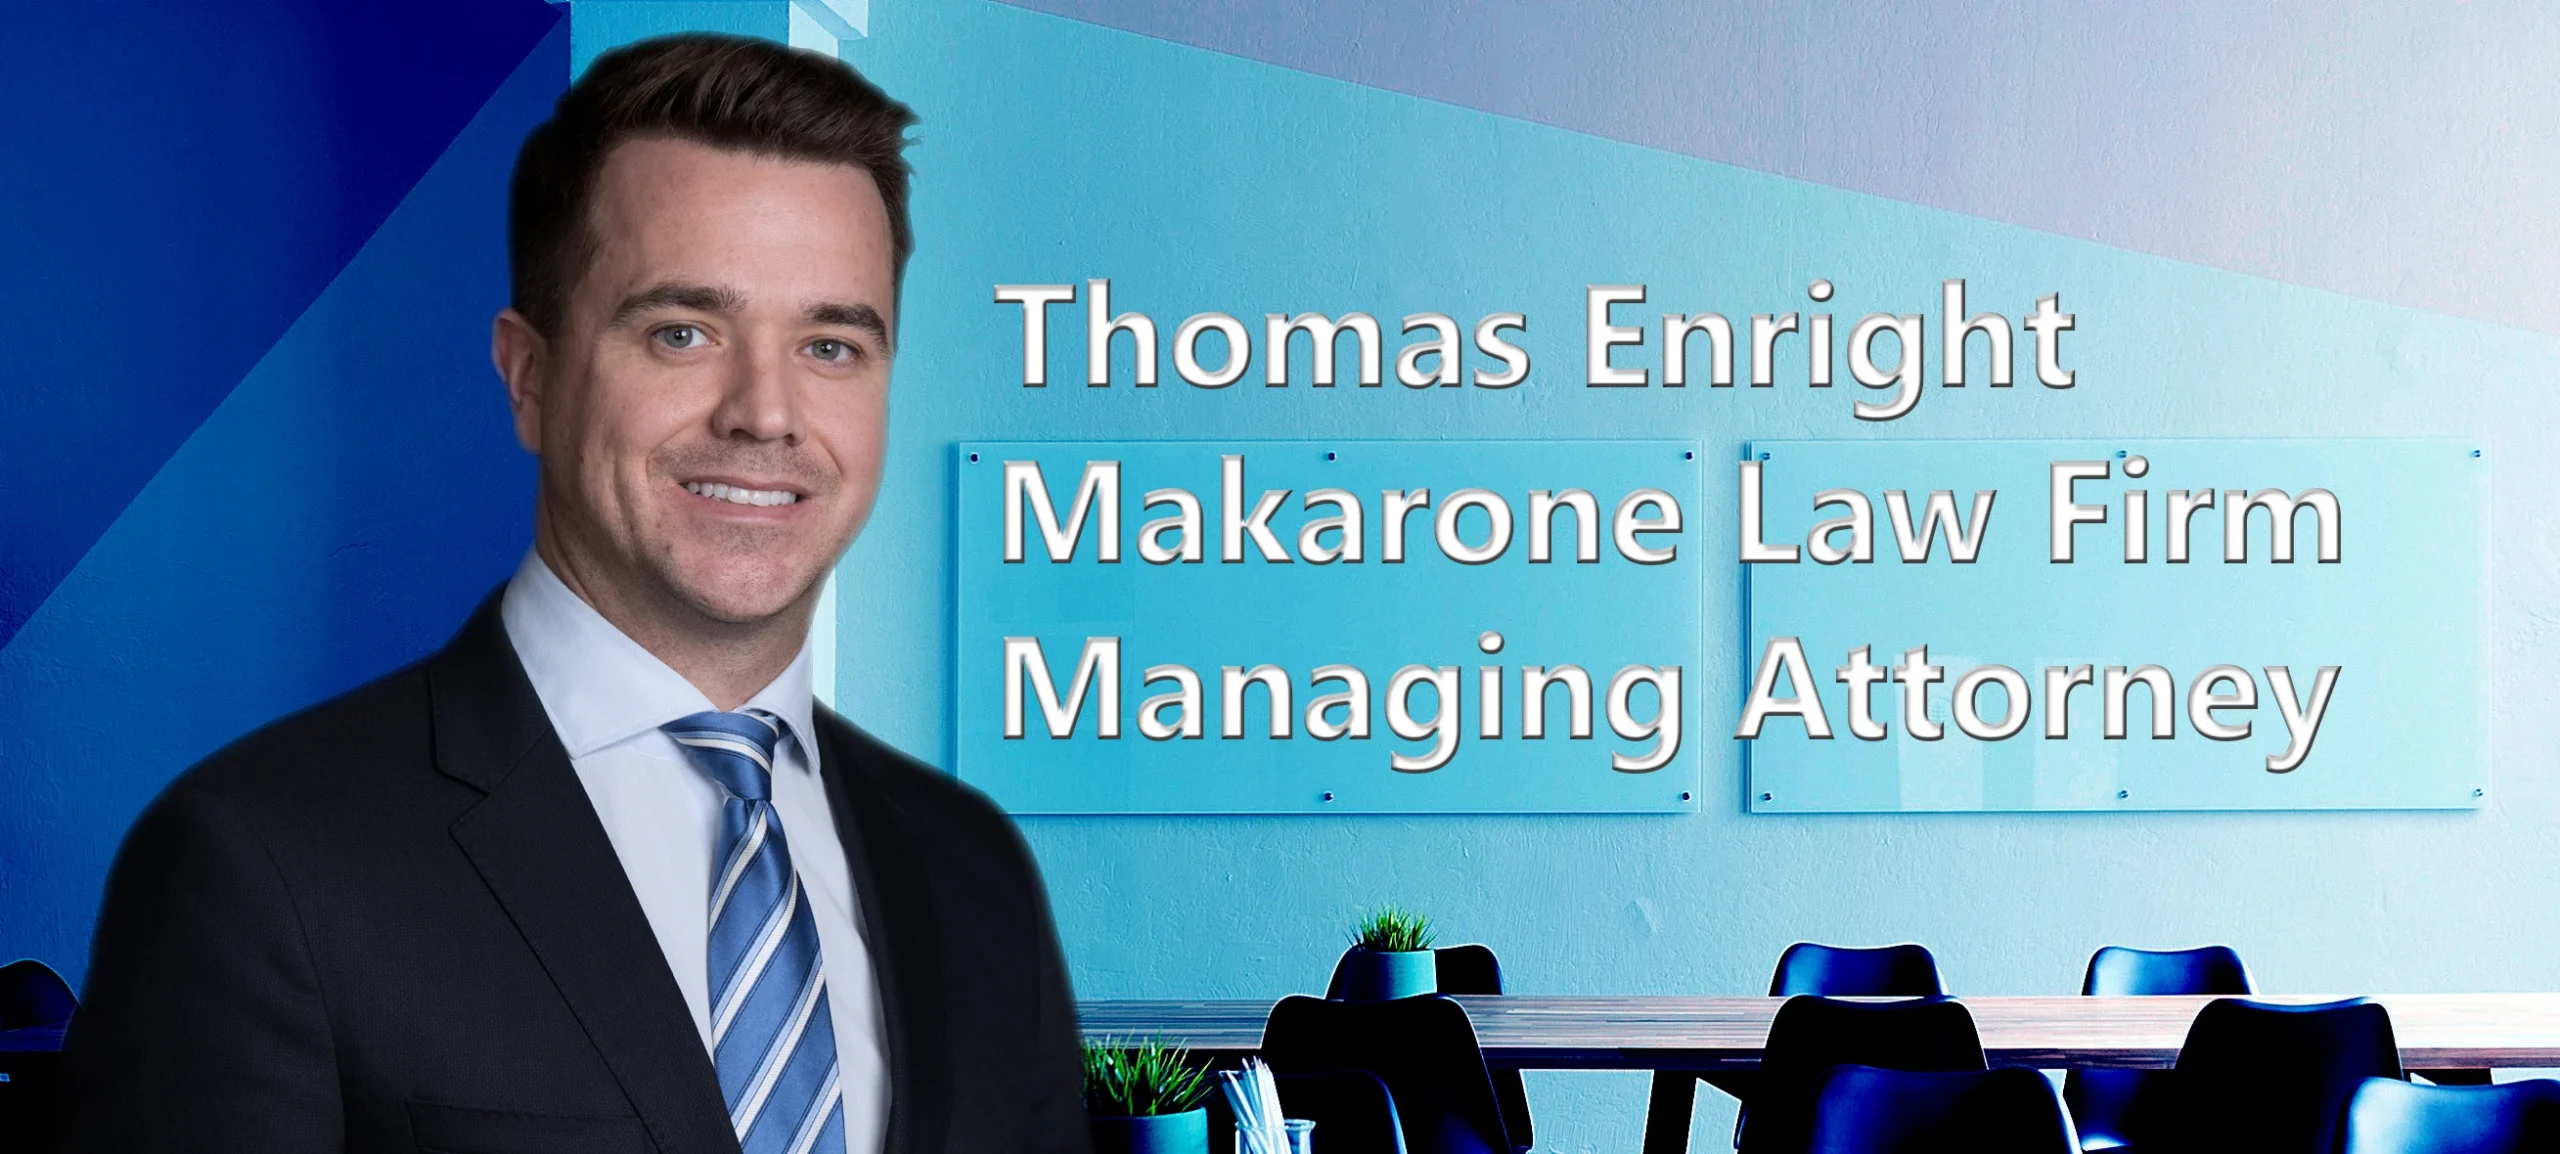 MAKARONE LAW FIRM 